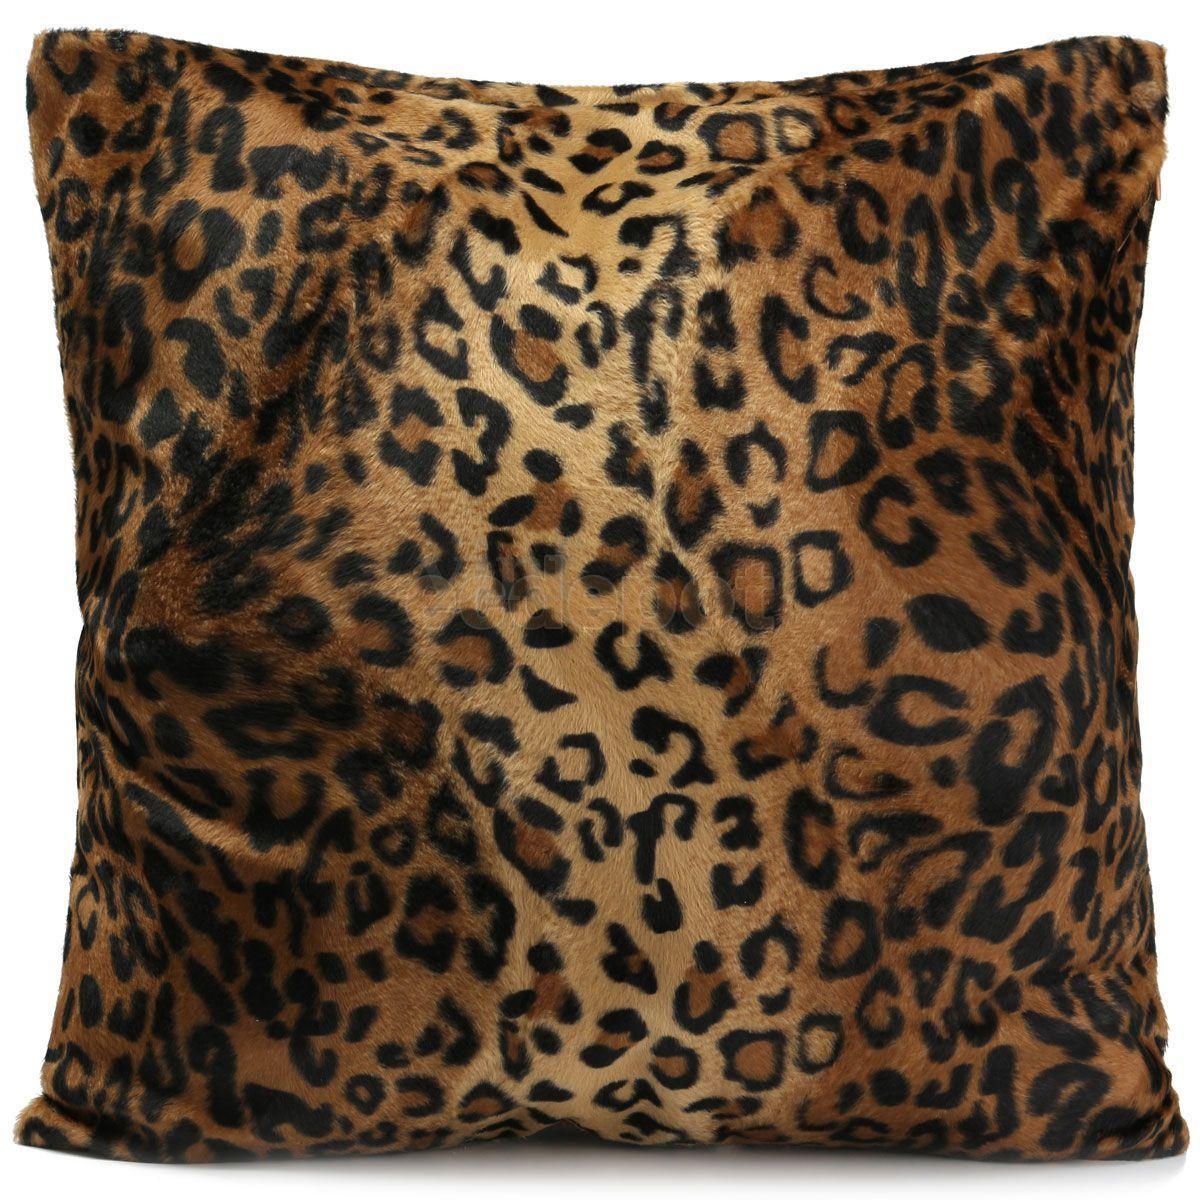 Compare Prices On Sofa Zebra Print  Online Shopping/buy Low Price Intended For Animal Print Sofas (View 2 of 20)